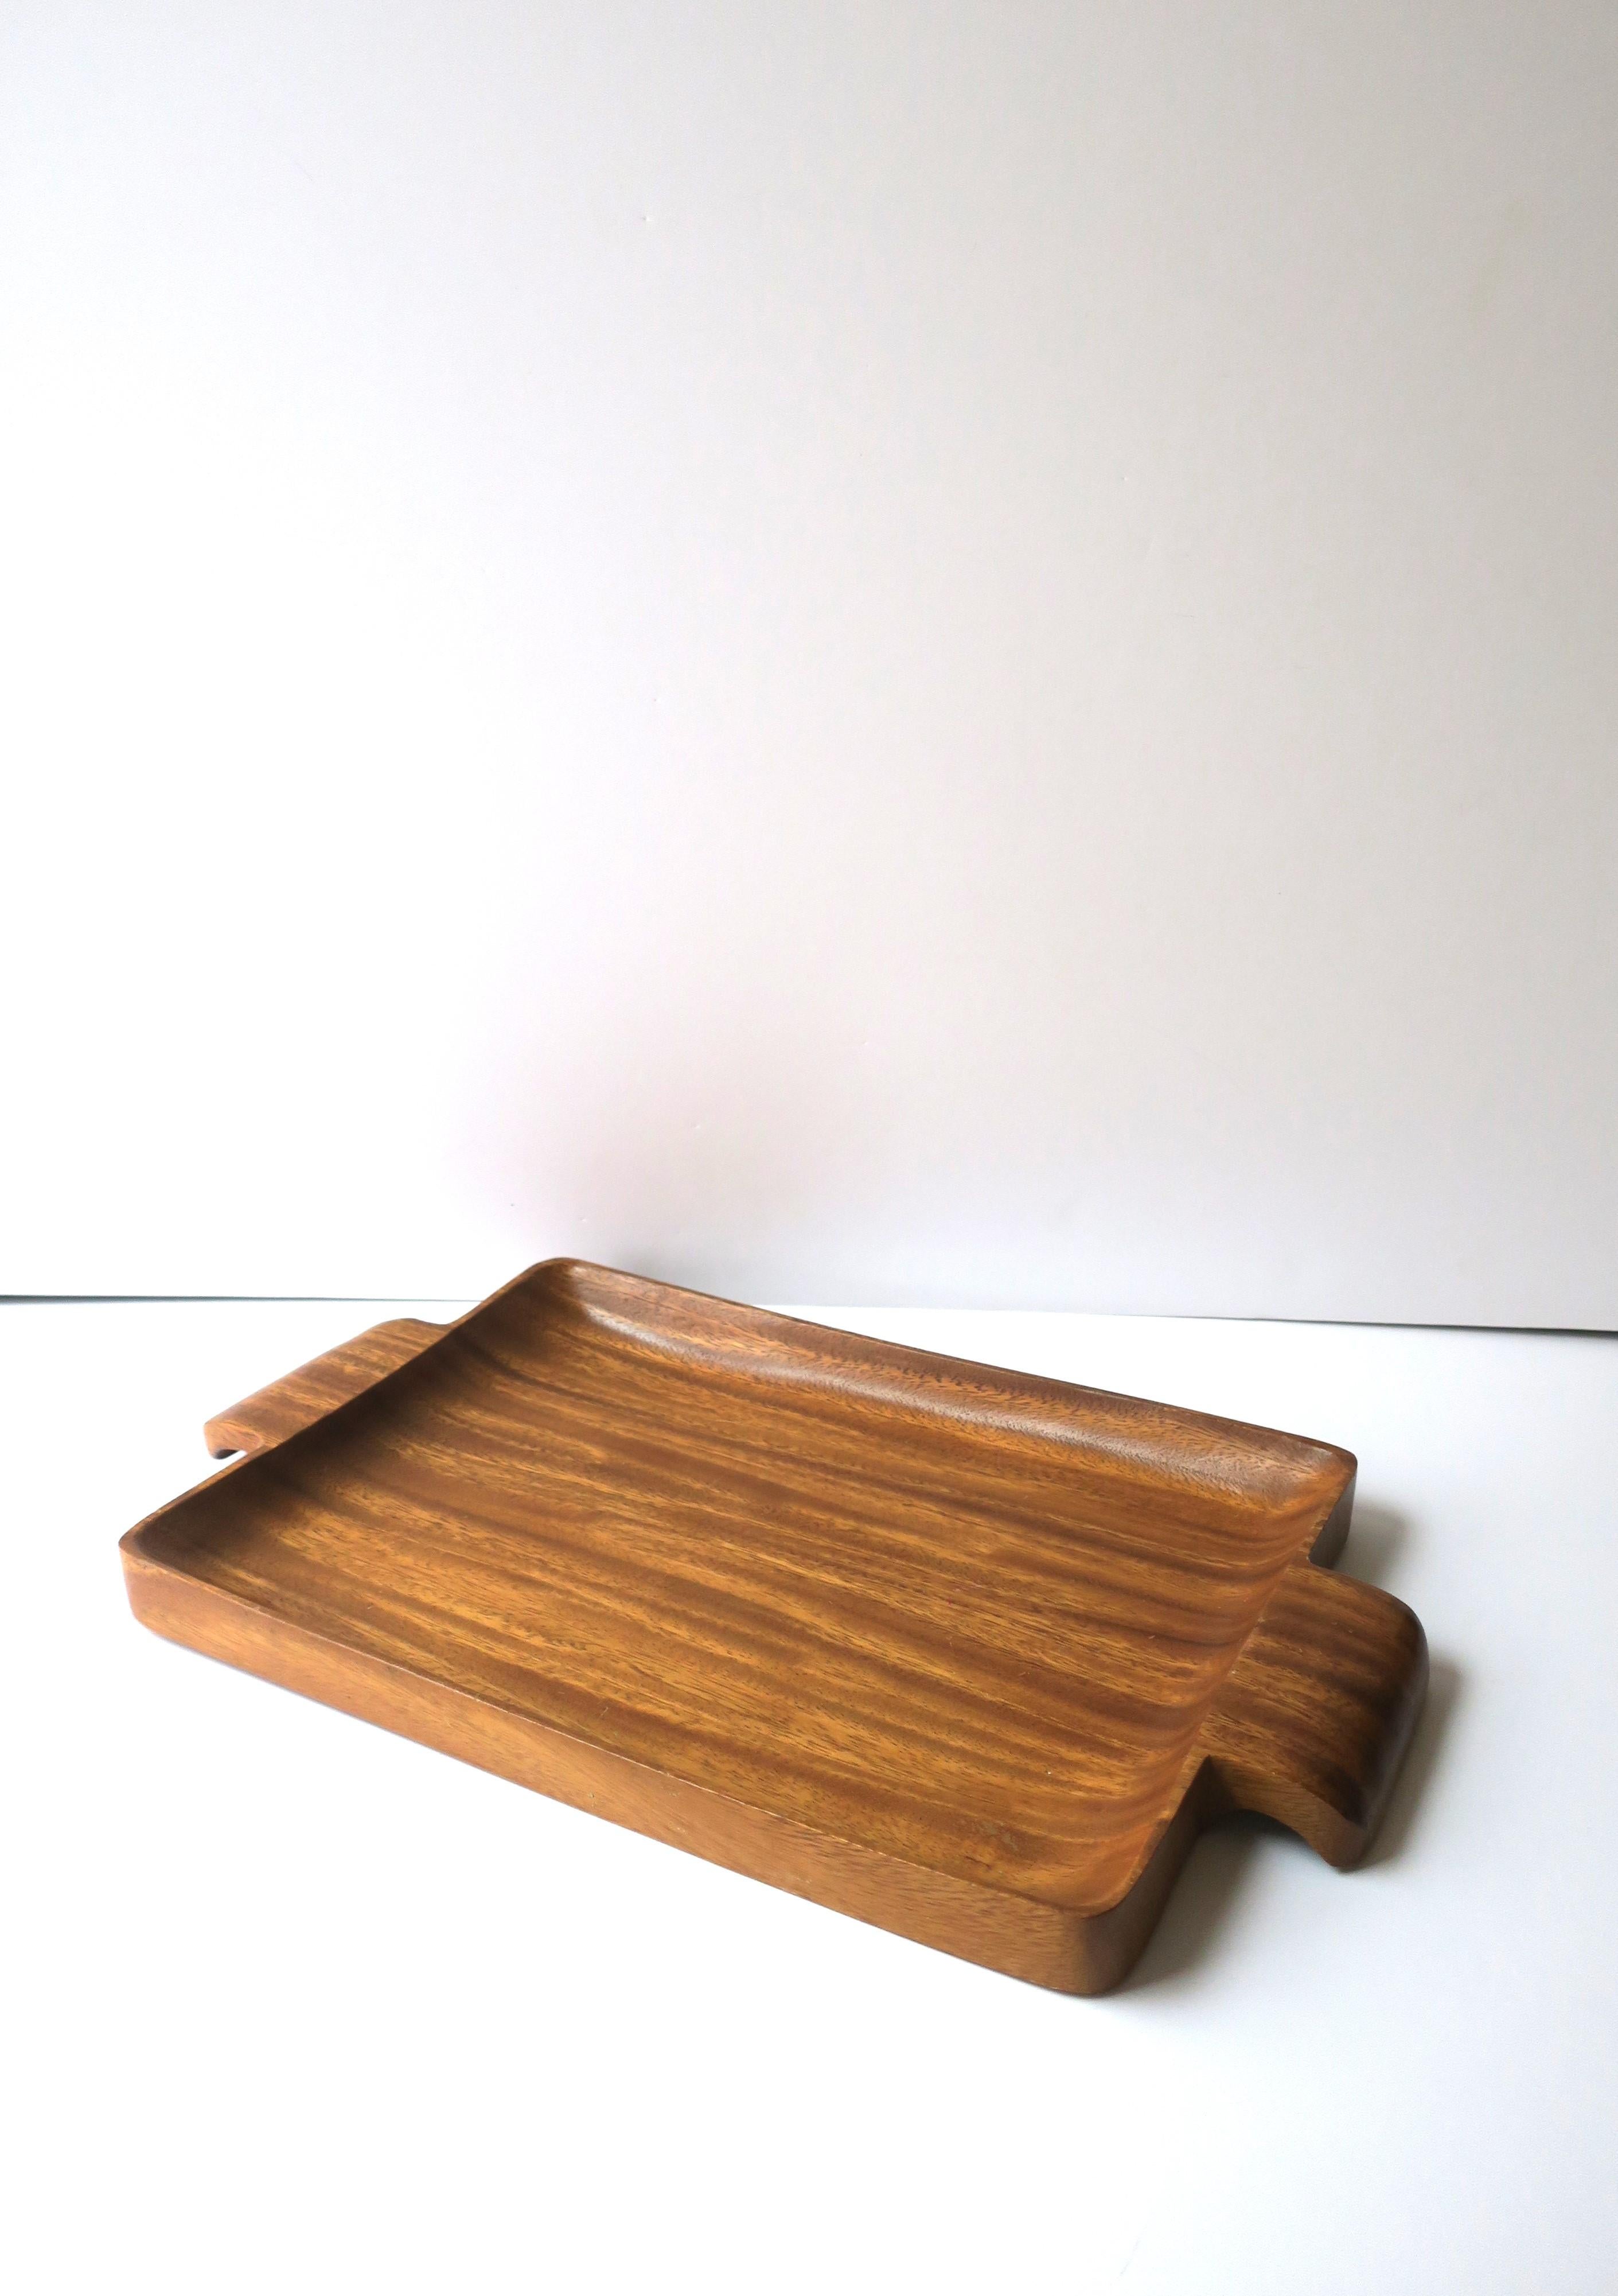 European Art Deco Wood Serving Tray For Sale